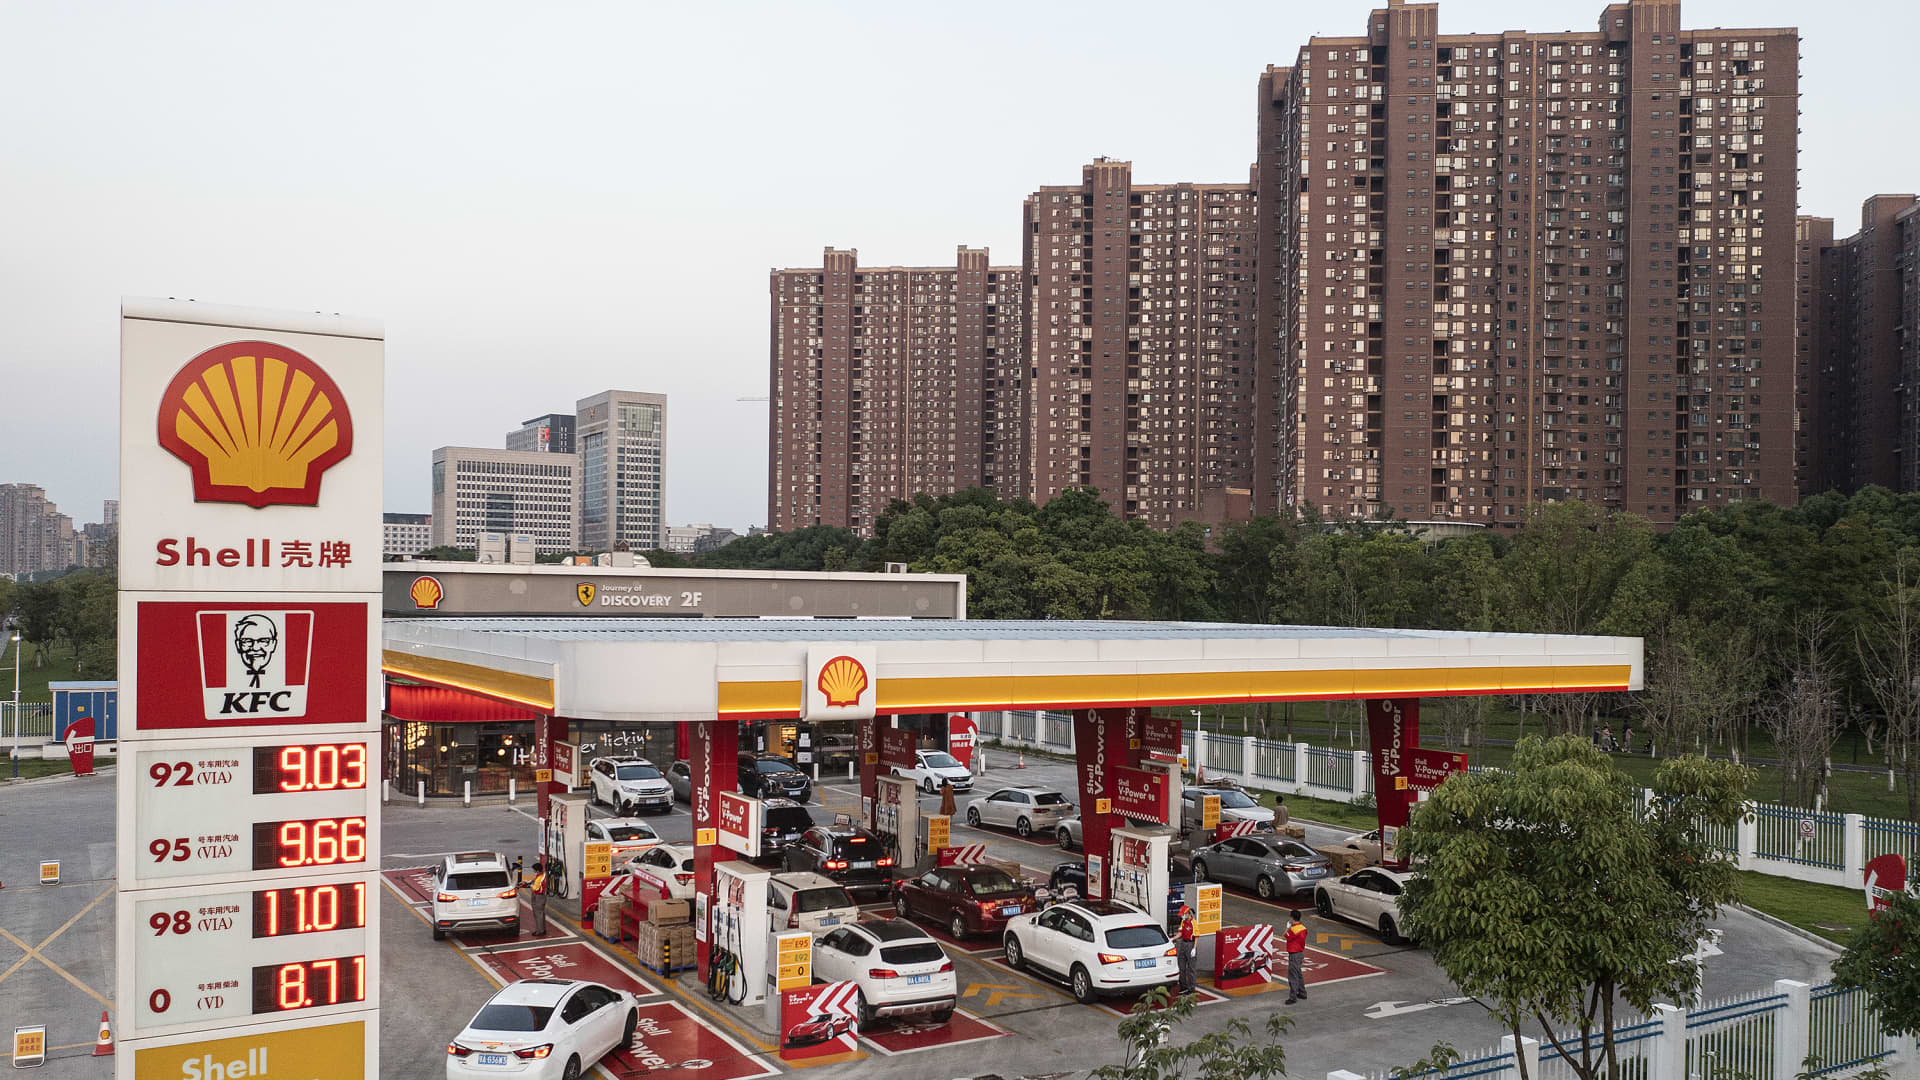 Shell CEO says EV charging stations in China are hot, predicts ‘robust’ oil and gas demand